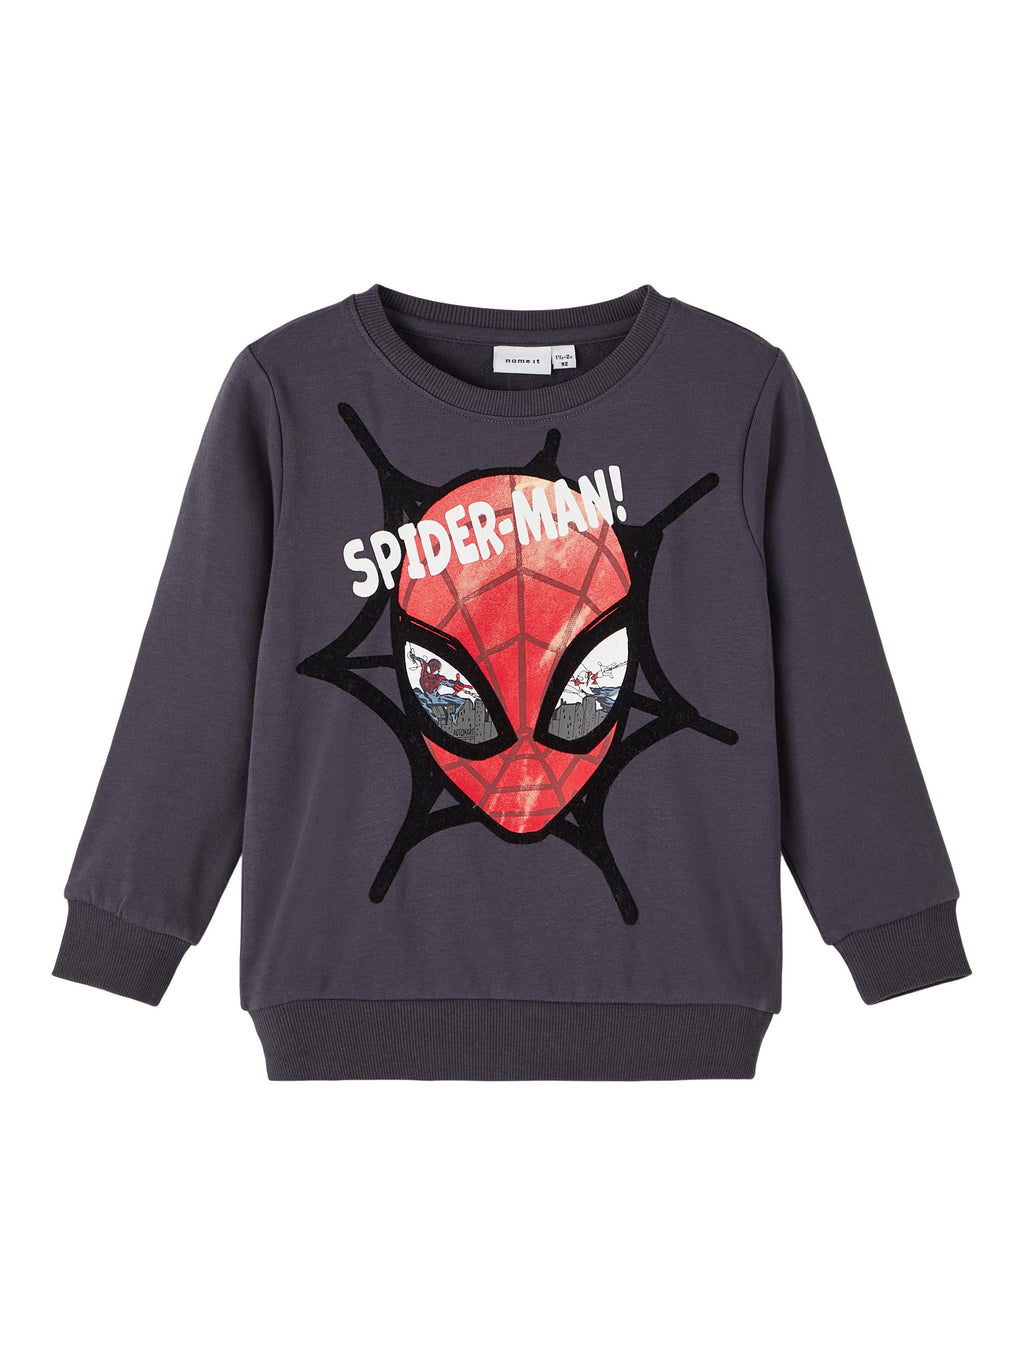 NAME IT Spiderman Sweater